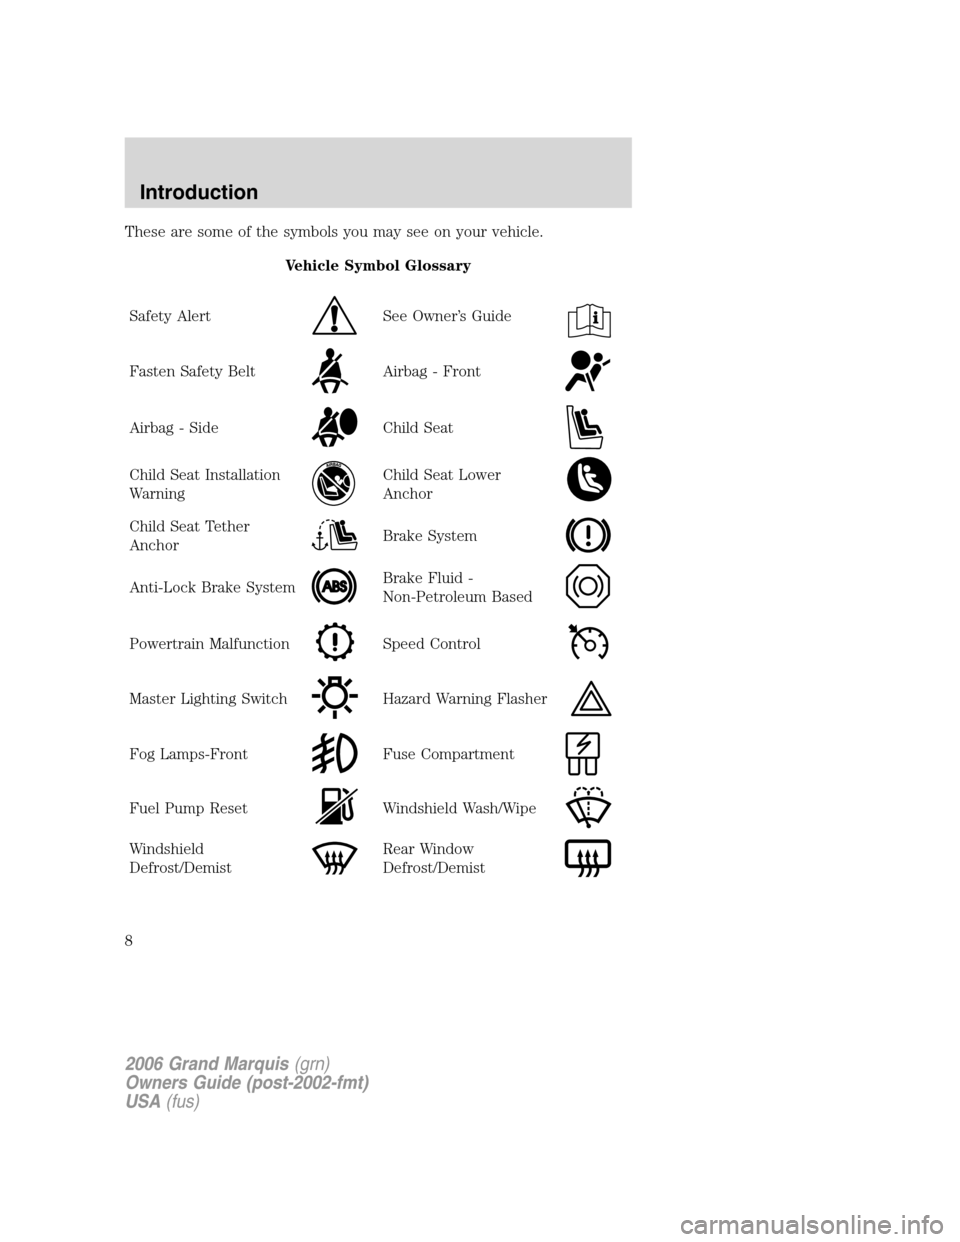 Mercury Grand Marquis 2006  Owners Manuals These are some of the symbols you may see on your vehicle.
Vehicle Symbol Glossary
Safety Alert
See Owner’s Guide
Fasten Safety BeltAirbag - Front
Airbag - SideChild Seat
Child Seat Installation
War